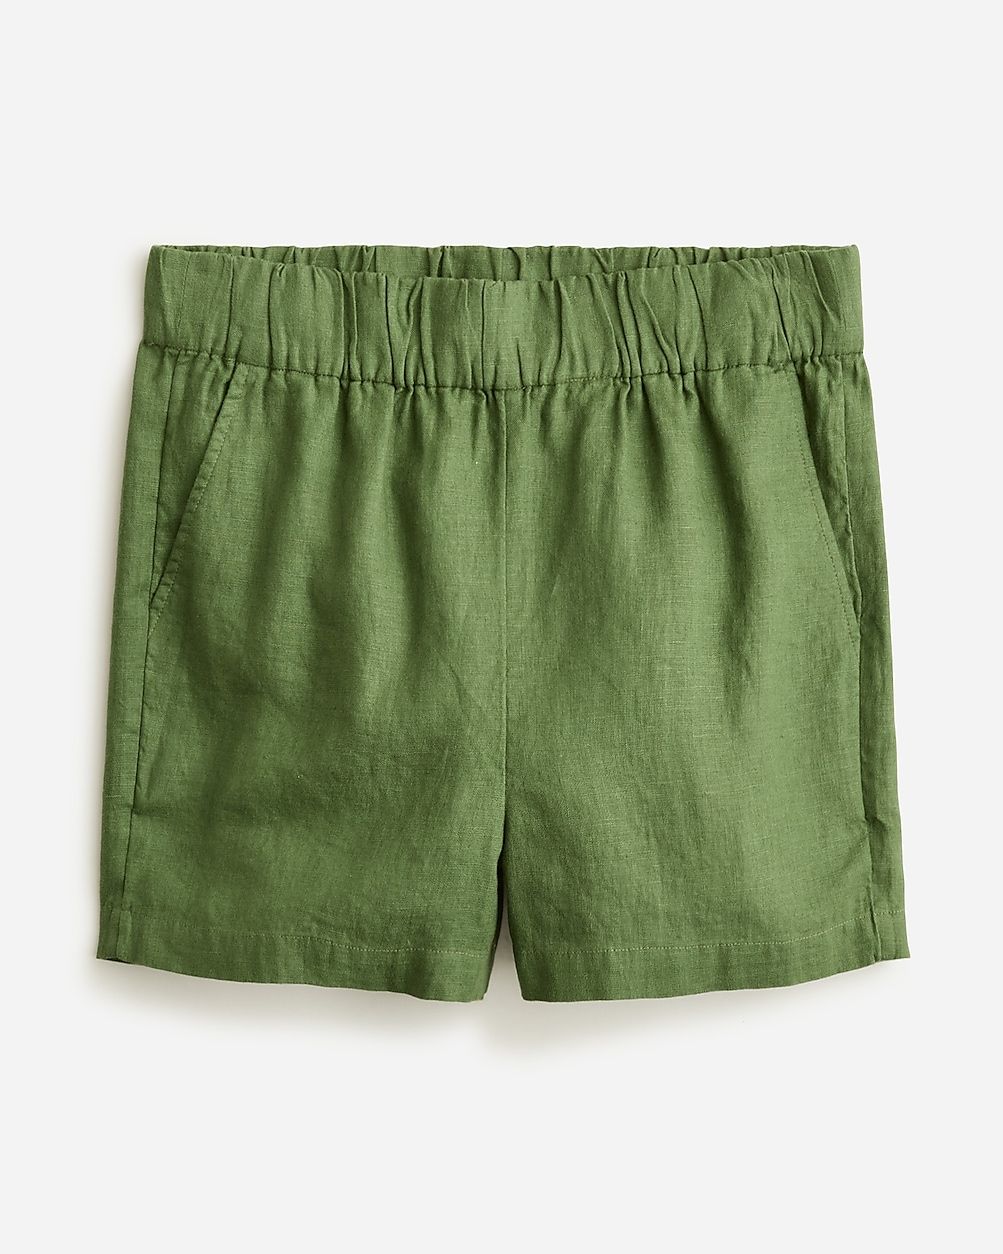 Shop this looknew color4.7(73 REVIEWS)Tropez short in linen$69.50Utility GreenSelect a sizeSize &... | J.Crew US